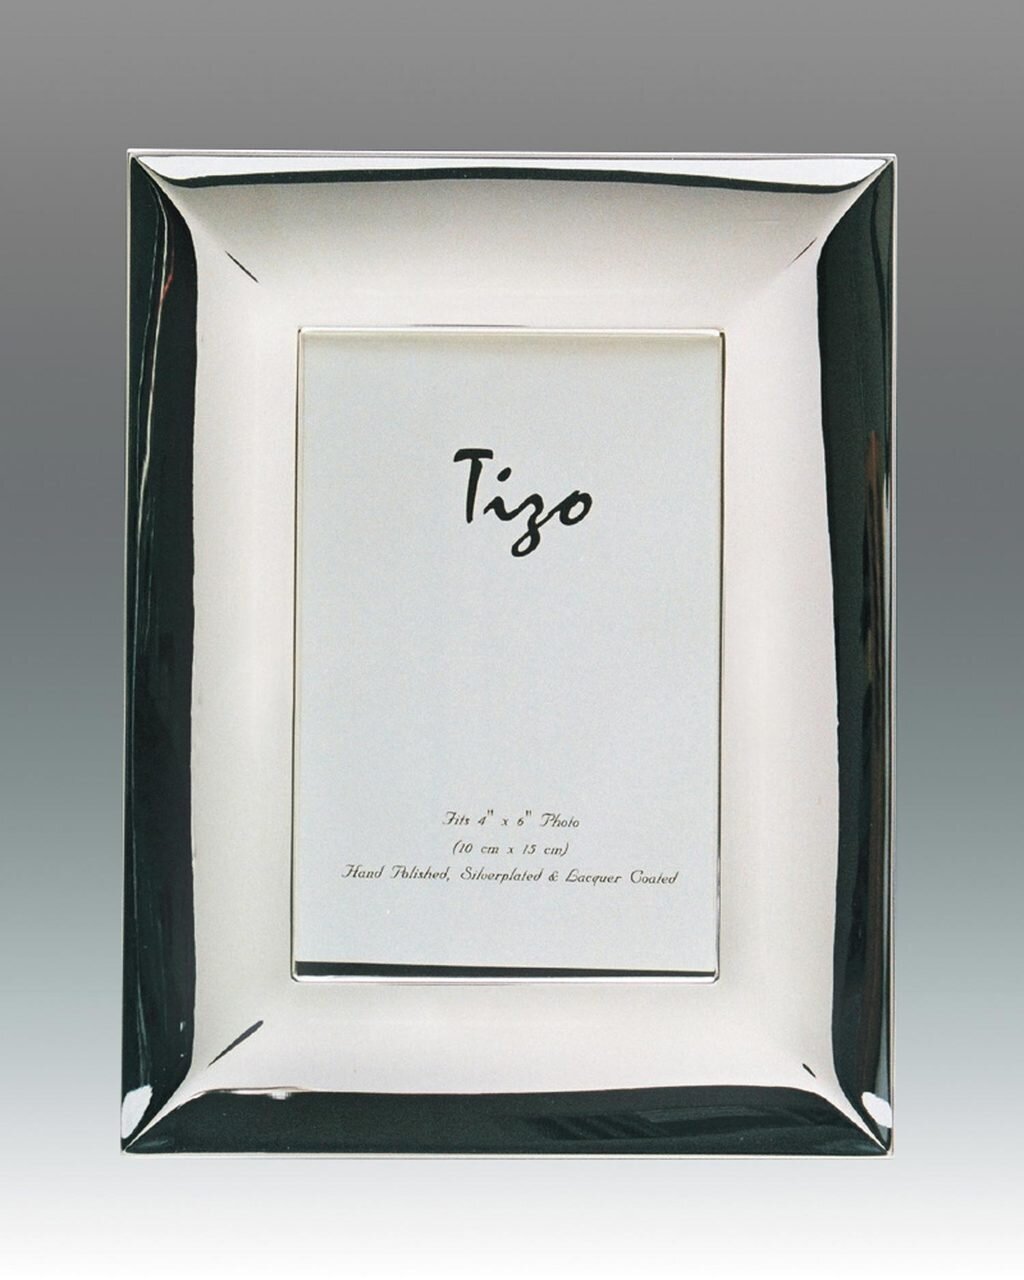 Tizo Classic Wide 5 x 7 Inch Silver Plated Picture Frame